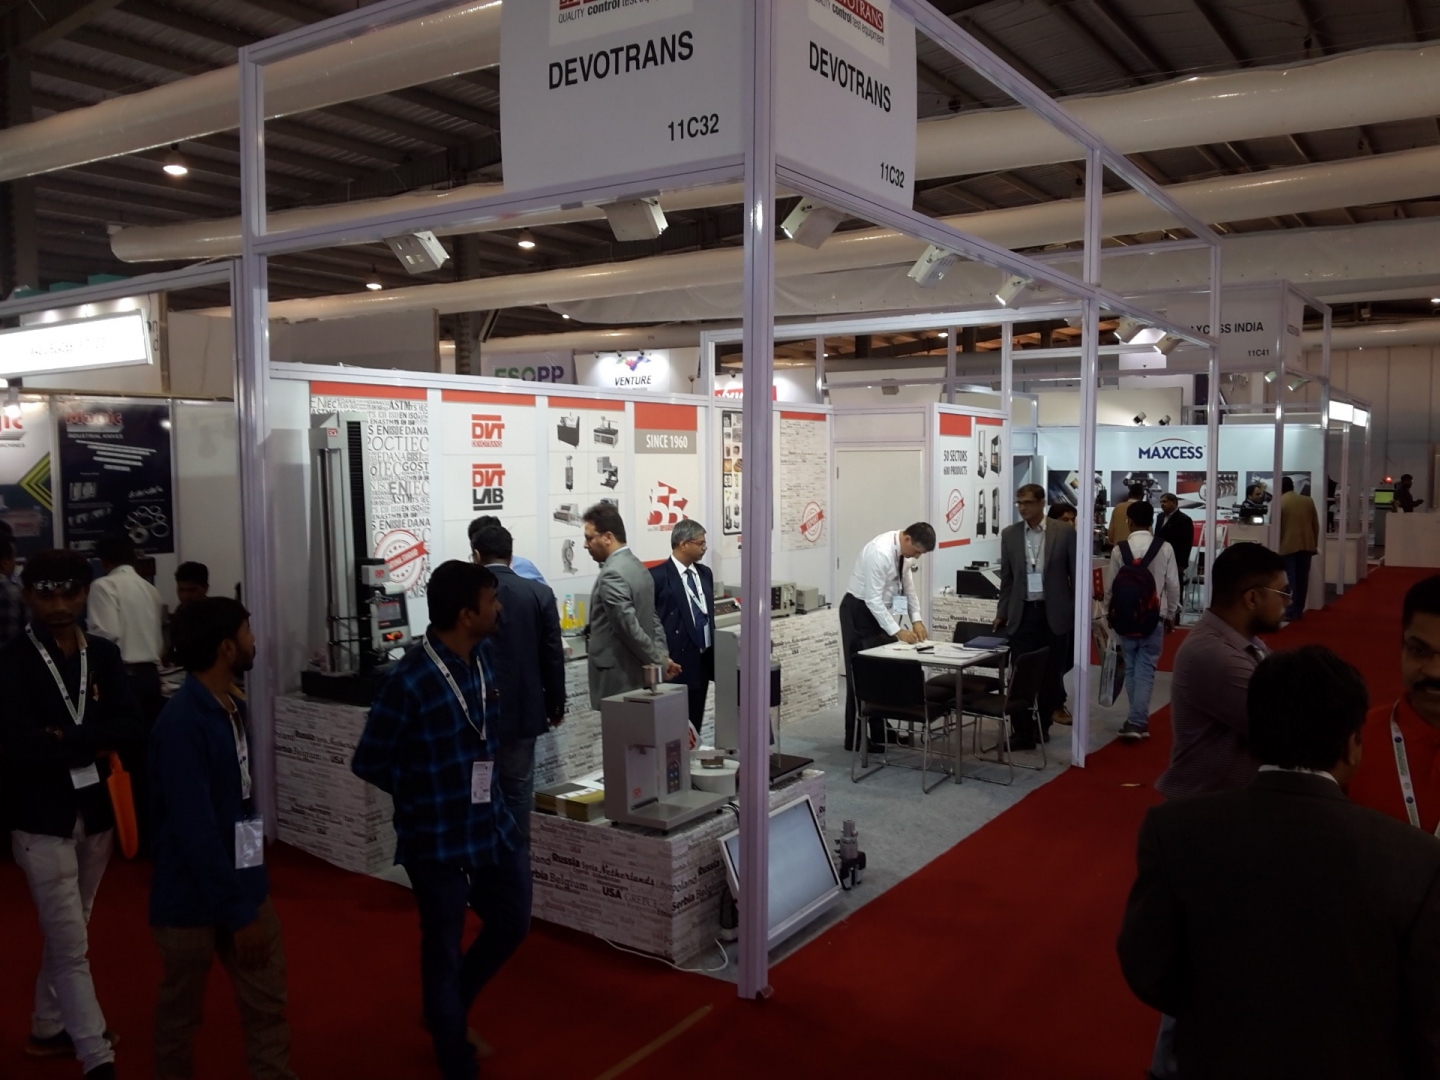 DVT DEVOTRANS contributed to the popularity of Plastindia 2018 that took place in India.